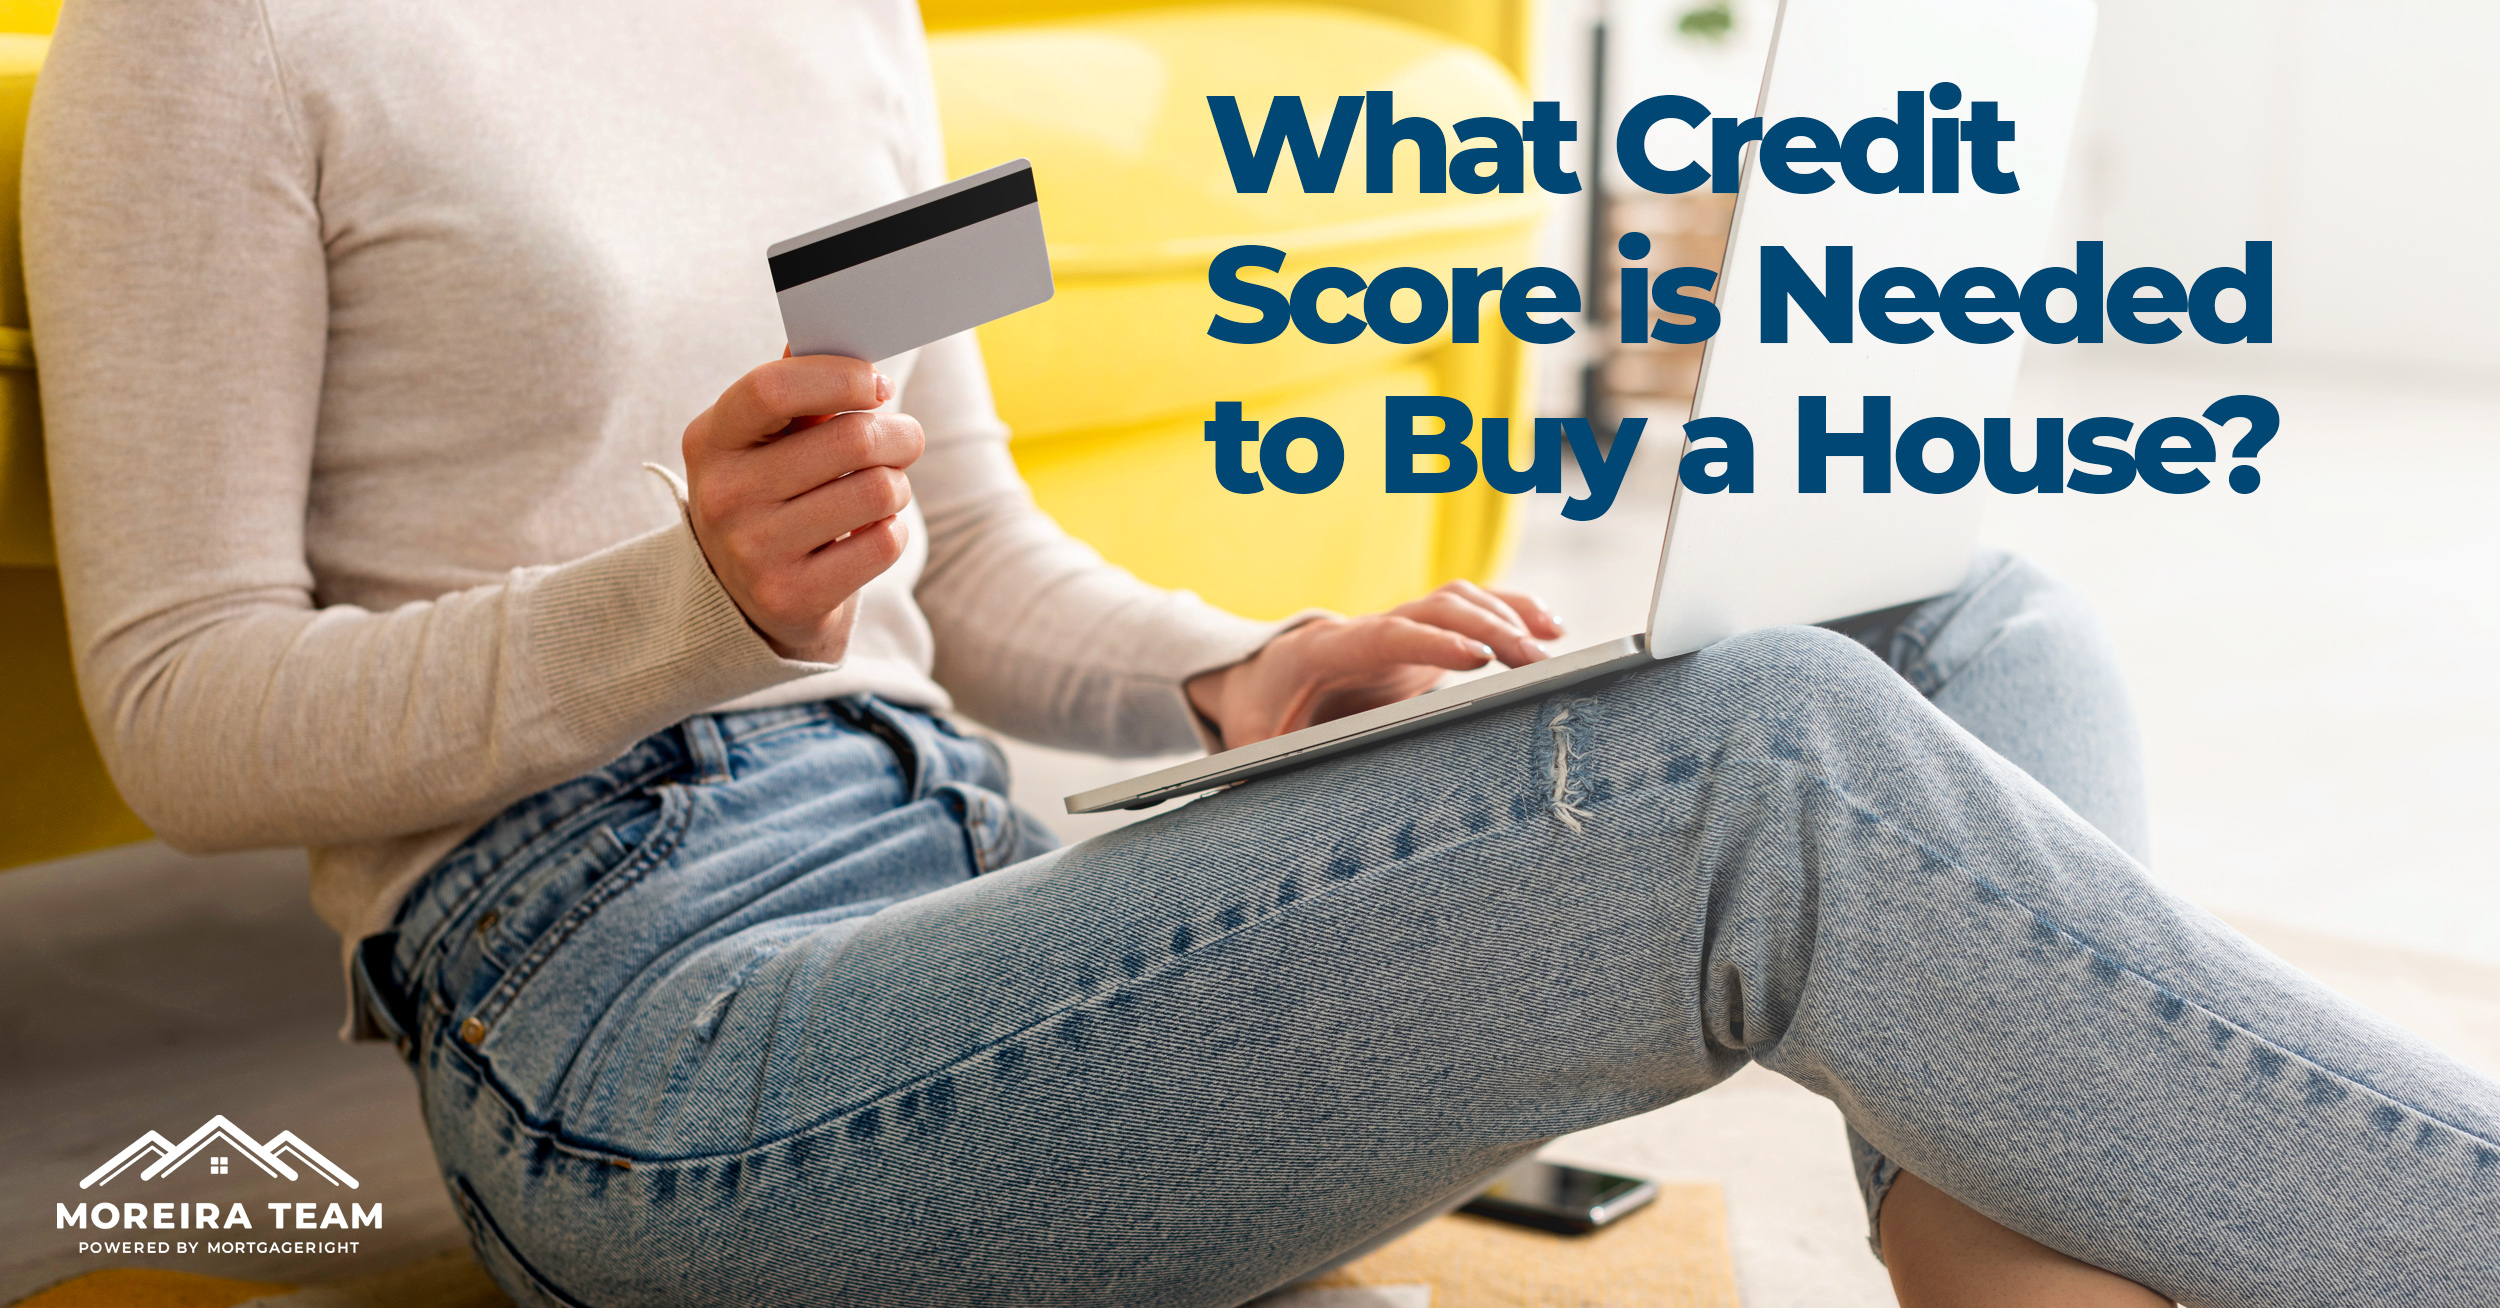 whwt credit score is needed to buy a house